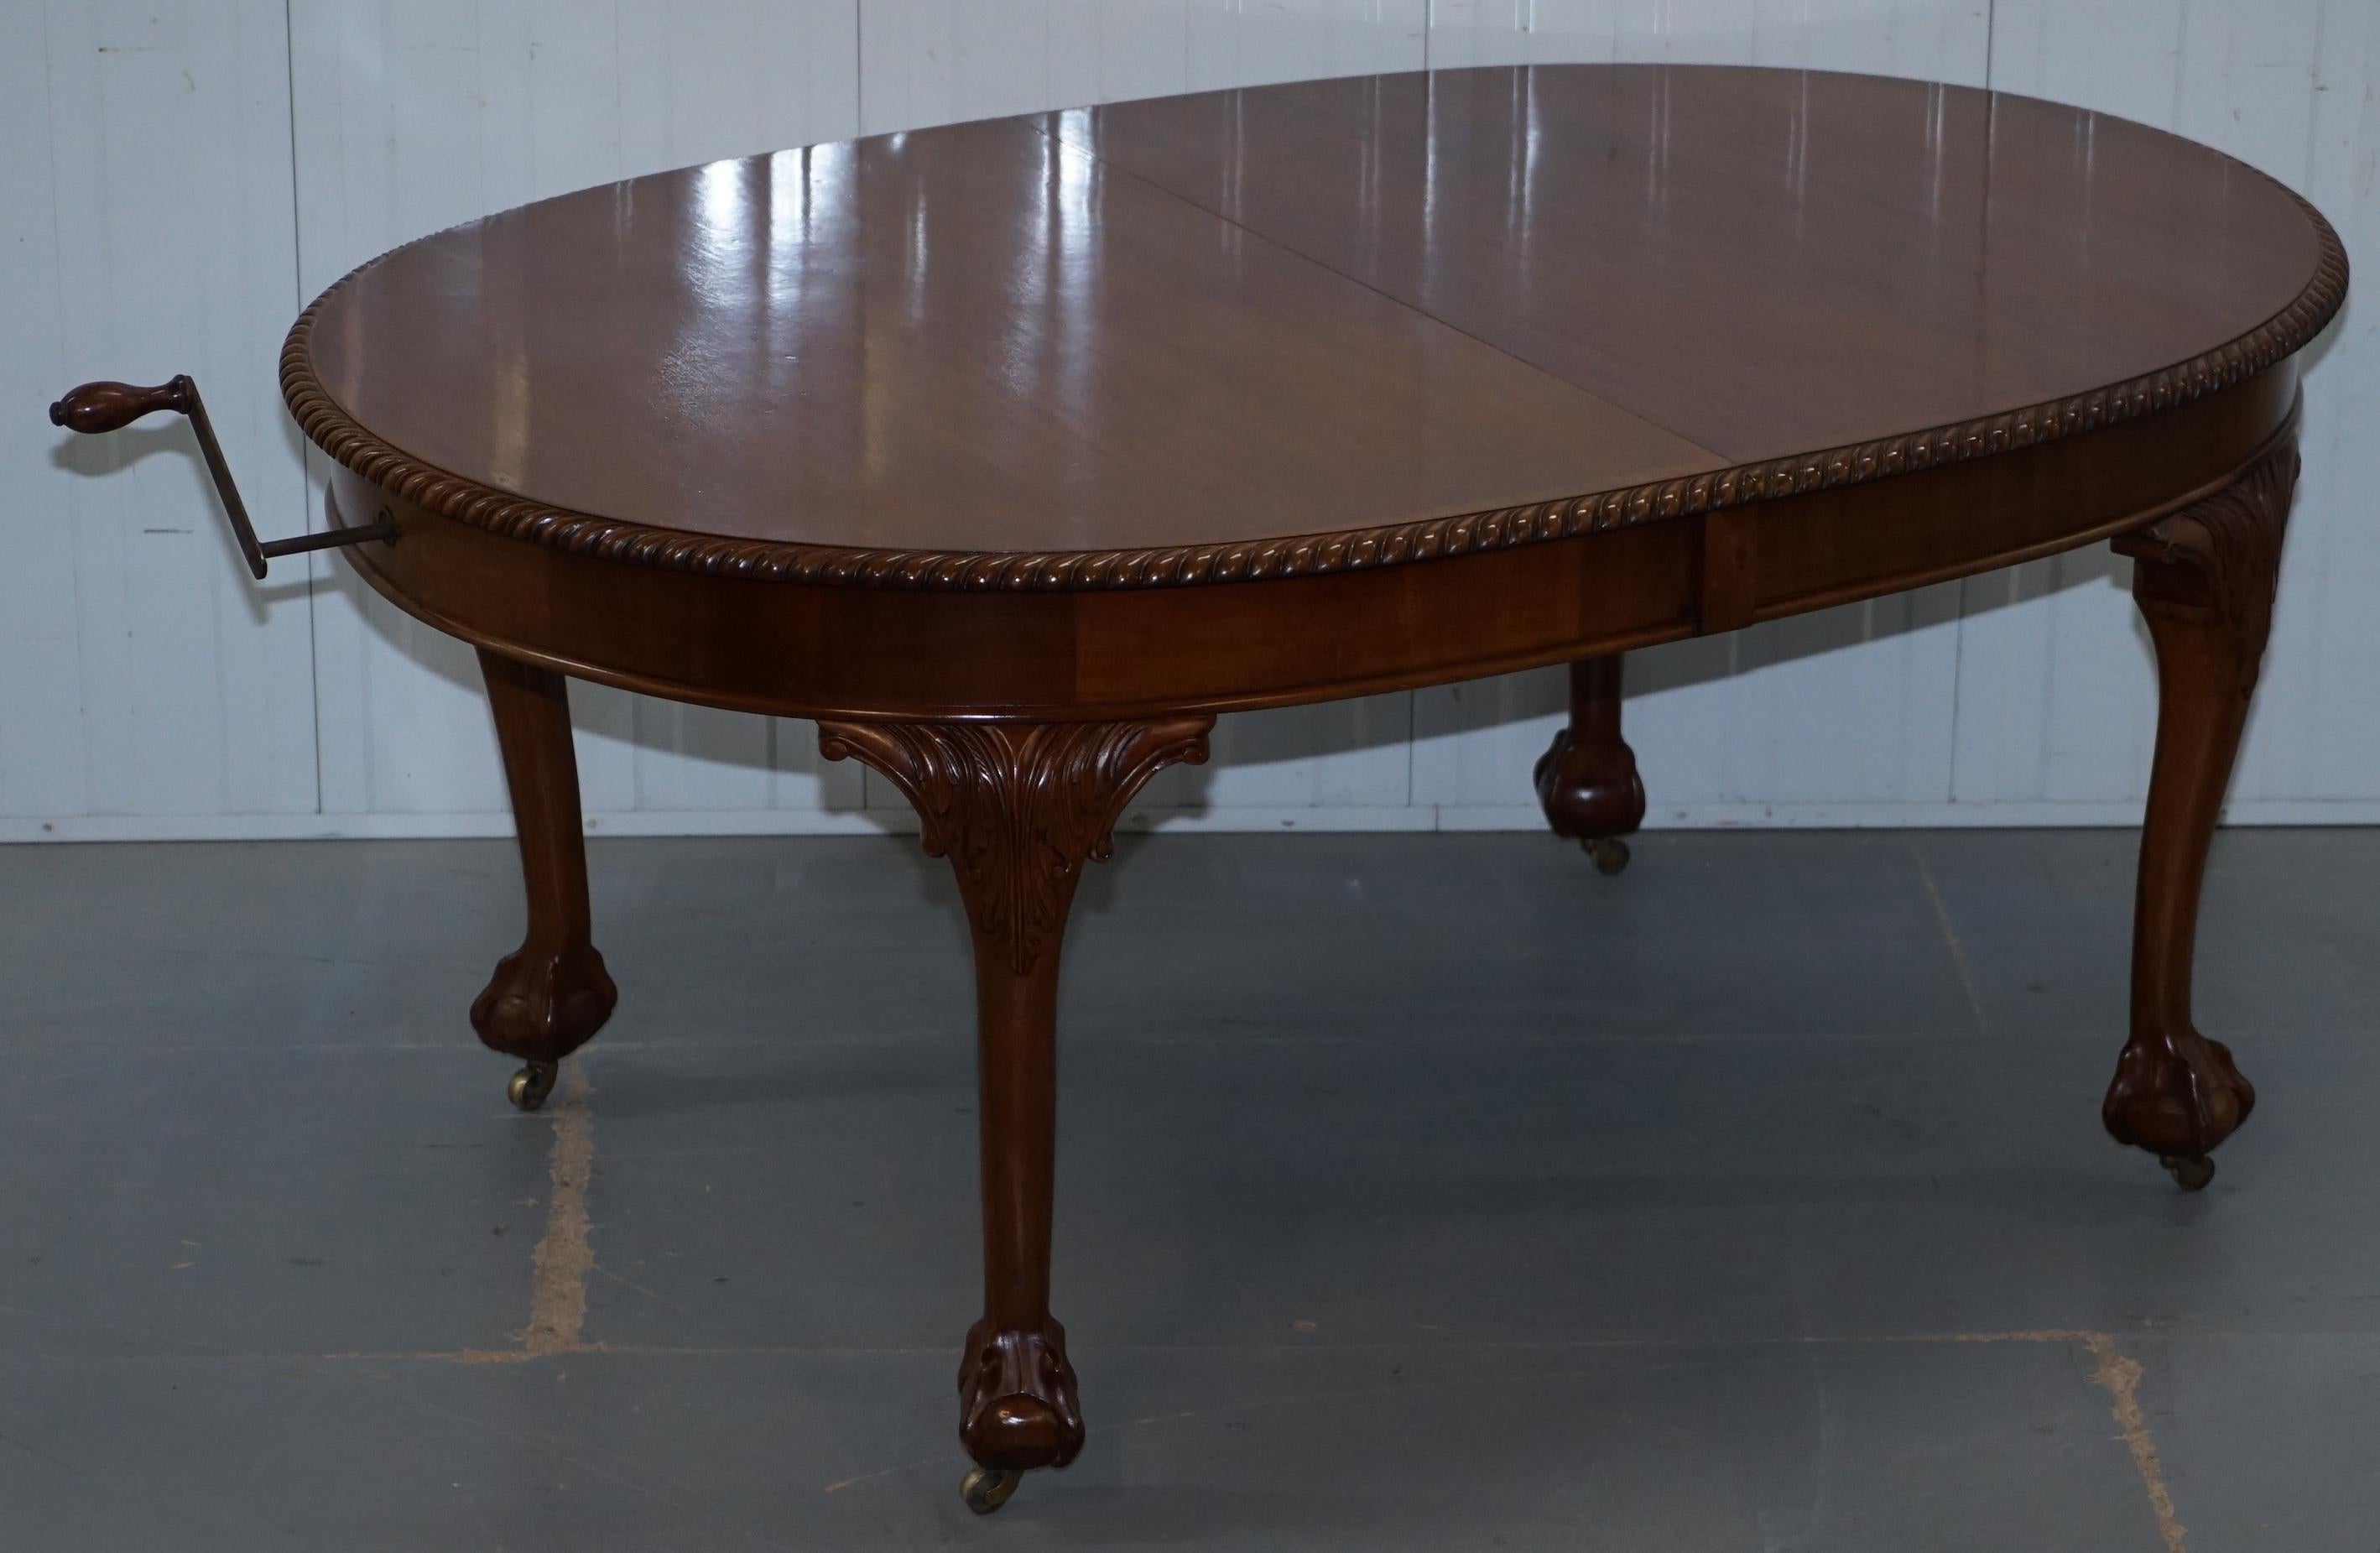 We are delighted to offer for salethis lovely solid walnut extending dining table with oversized hand carved claw and ball feet, circa 1920

A very good looking well made and substantial piece in good antique condition throughout. The claw and